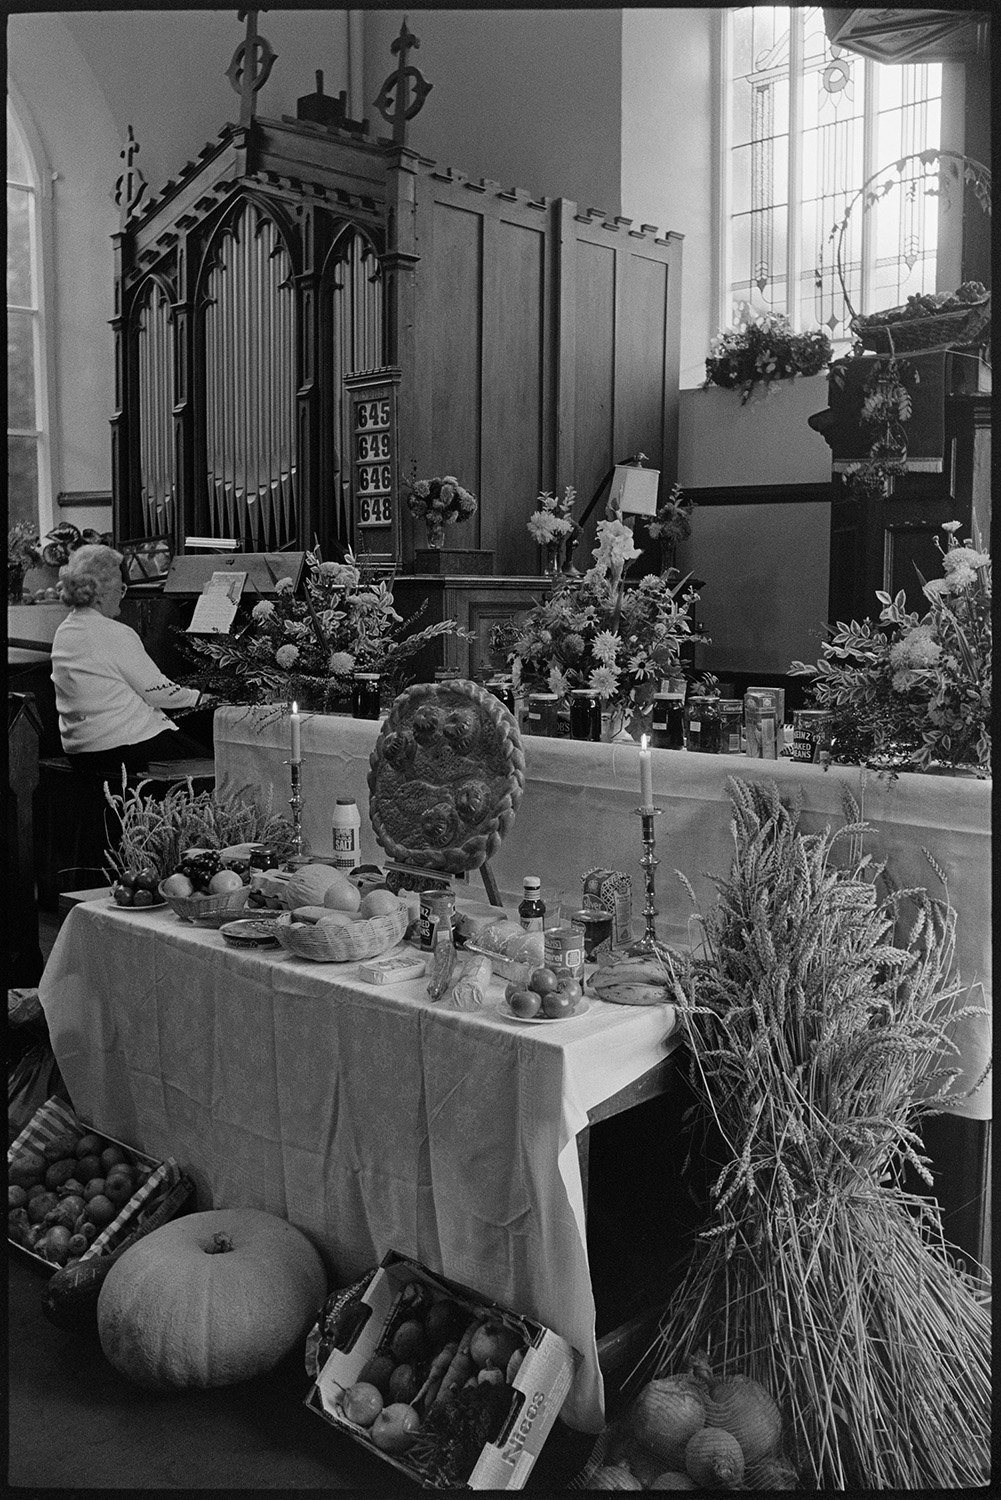 Harvest Festival display in Chapel, bread, produce and fruit. 
[A harvest festival display at the altar in Chulmleigh Congregational Chapel including sheaves of corn, swedes, jars of jam, tinned food, bananas and flower arrangements. A woman can be seen playing the organ in the background.]